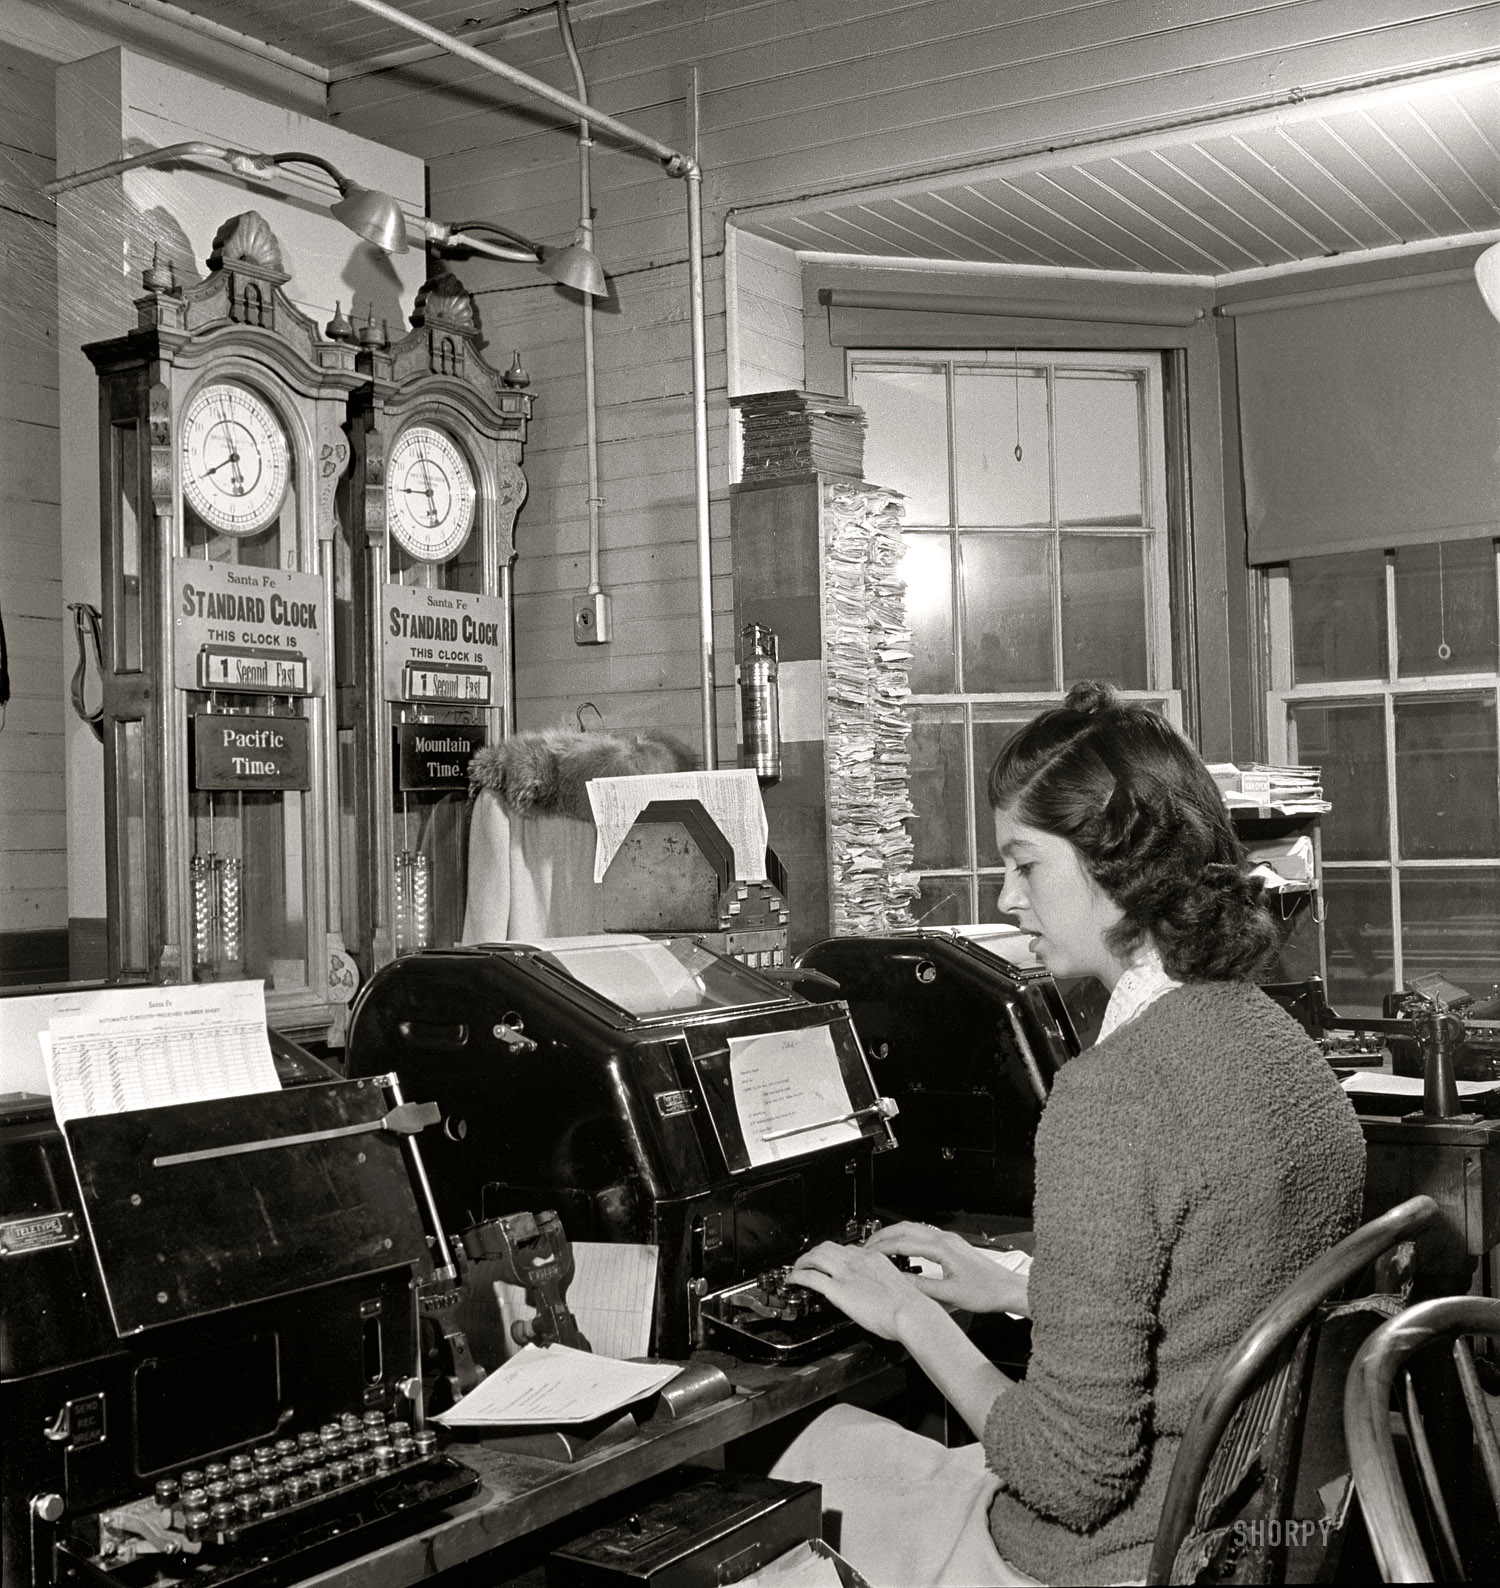 March 1943. "Seligman, Arizona. Teletype operator in the telegraph office of the Atchison, Topeka, and Santa Fe Railroad. The time here changes from Mountain to Pacific time." Medium-format safety negative by Jack Delano. View full size.